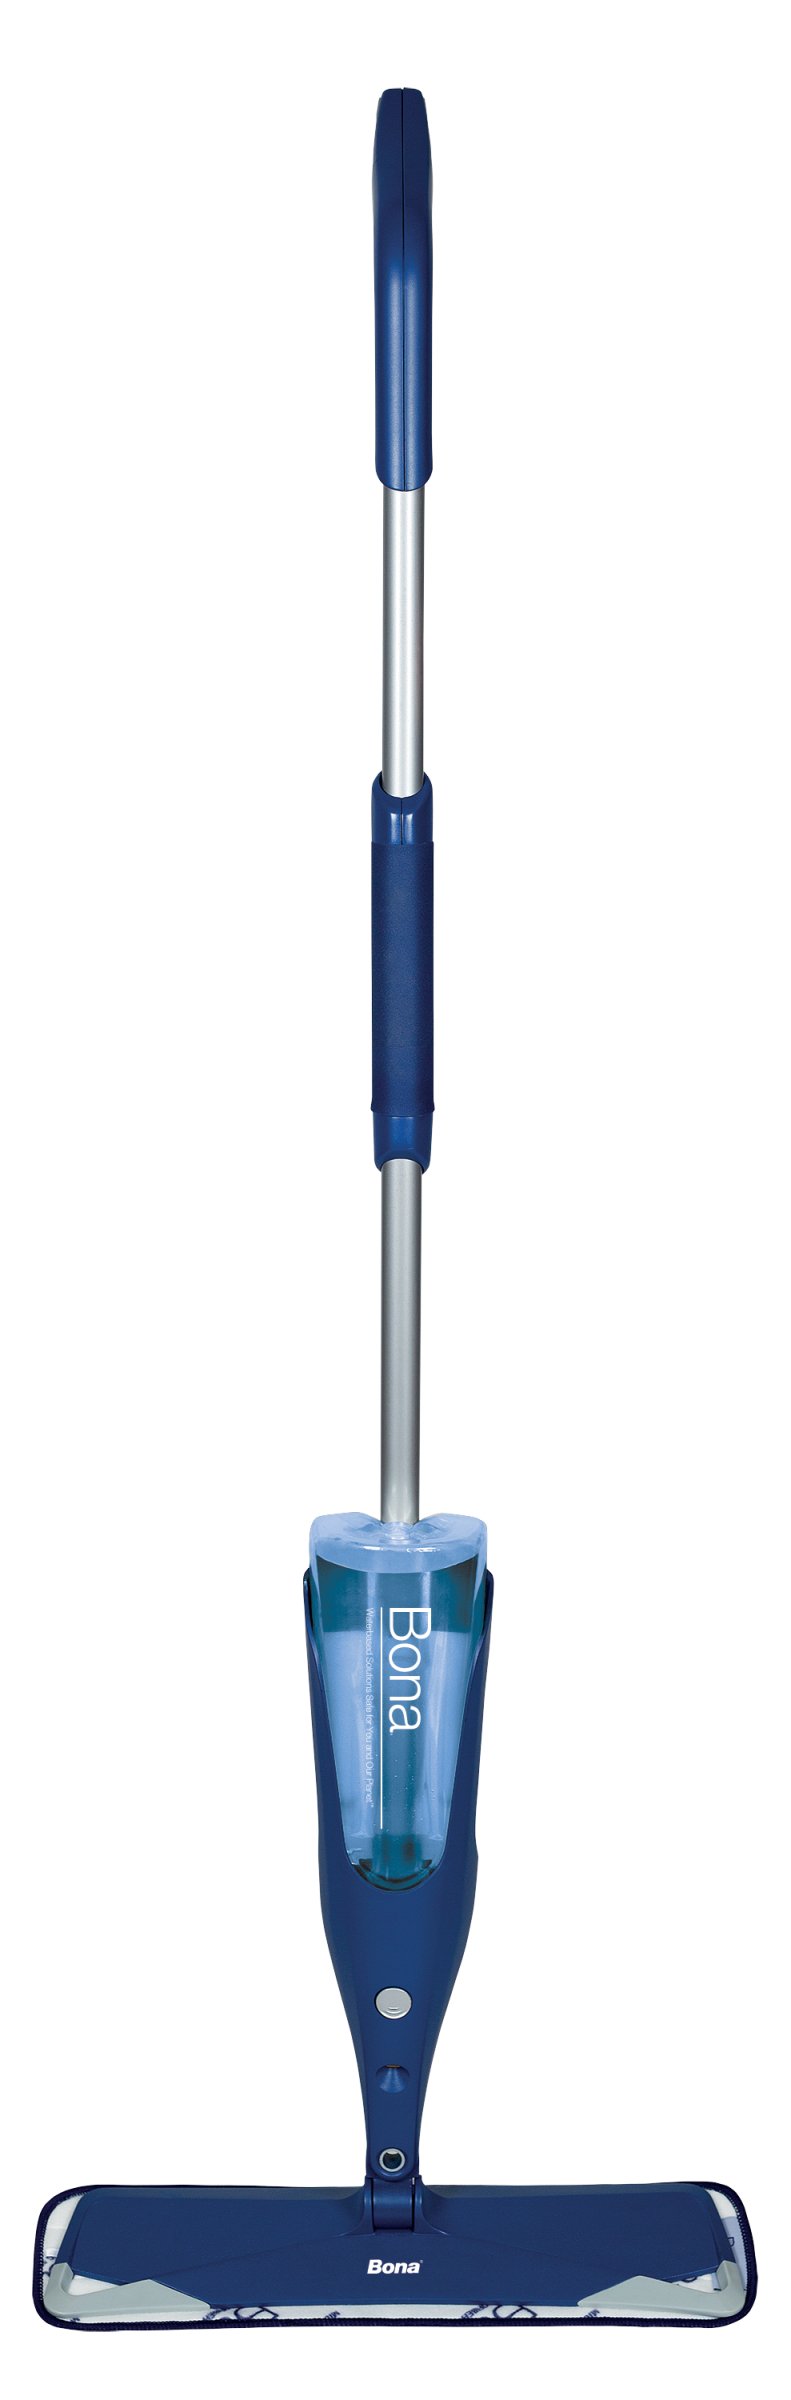 Buy Spray Mop for Floor Cleaning Online at Best Prices